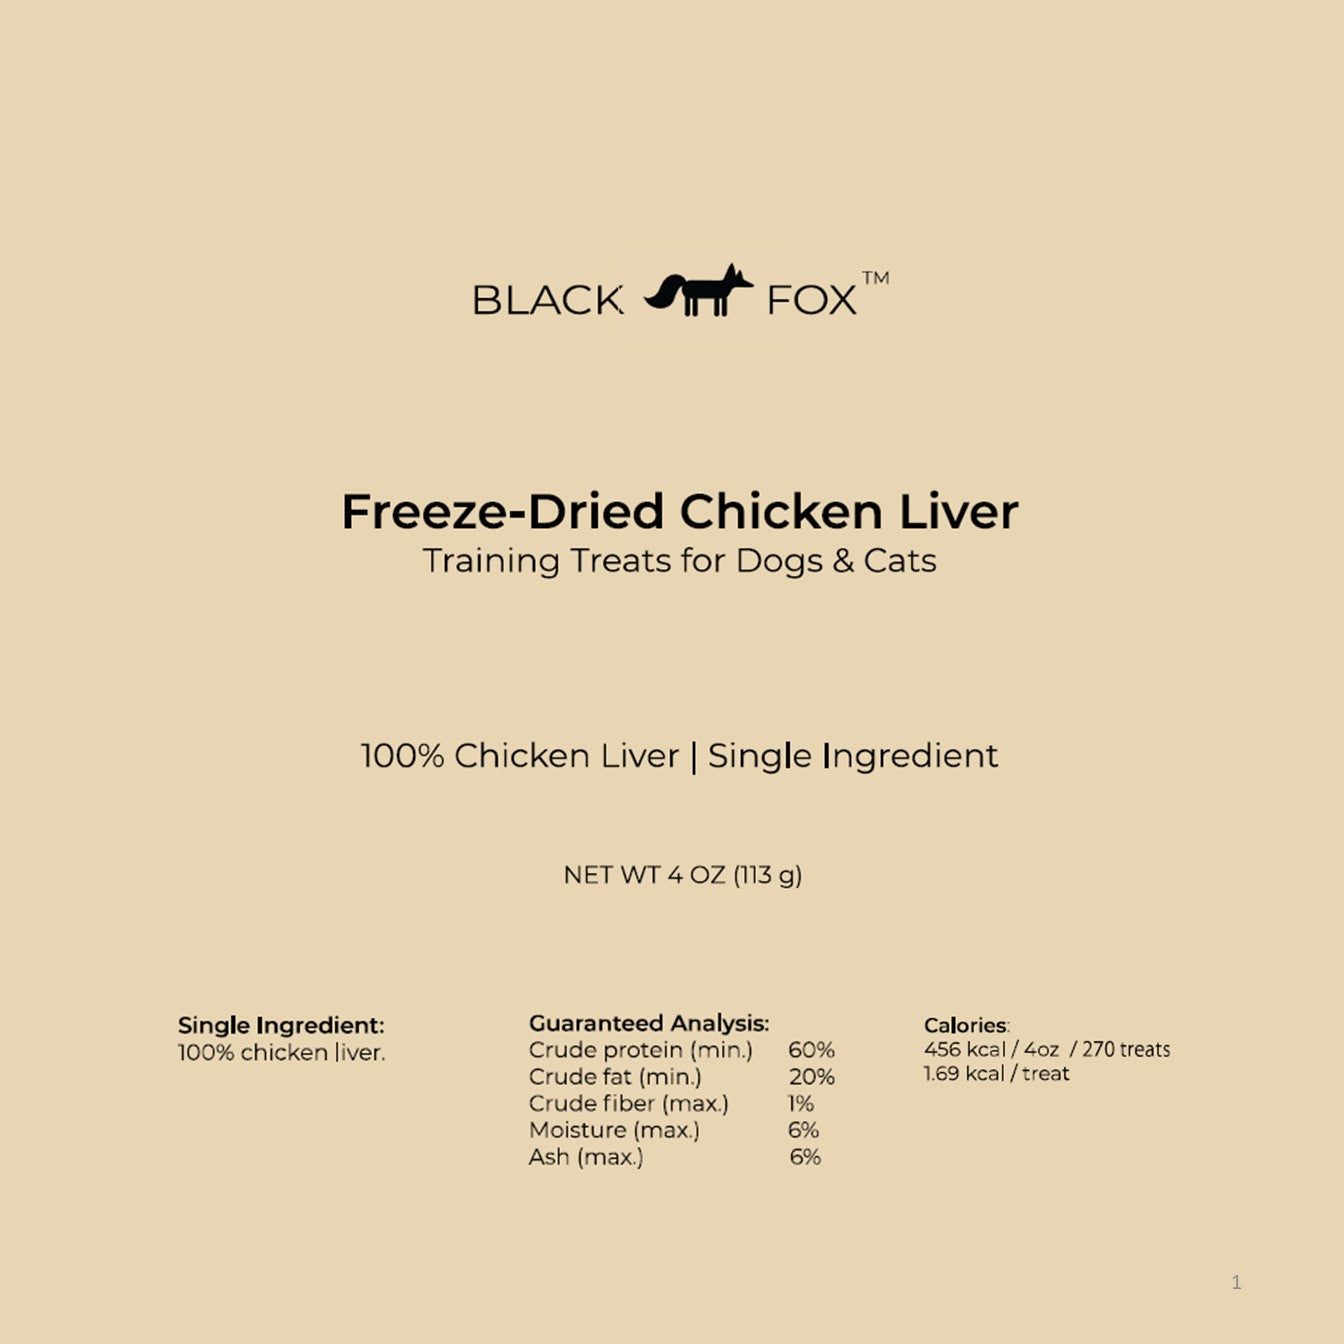 Freeze-Dried Chicken Liver Training Treats for Dogs & Cats